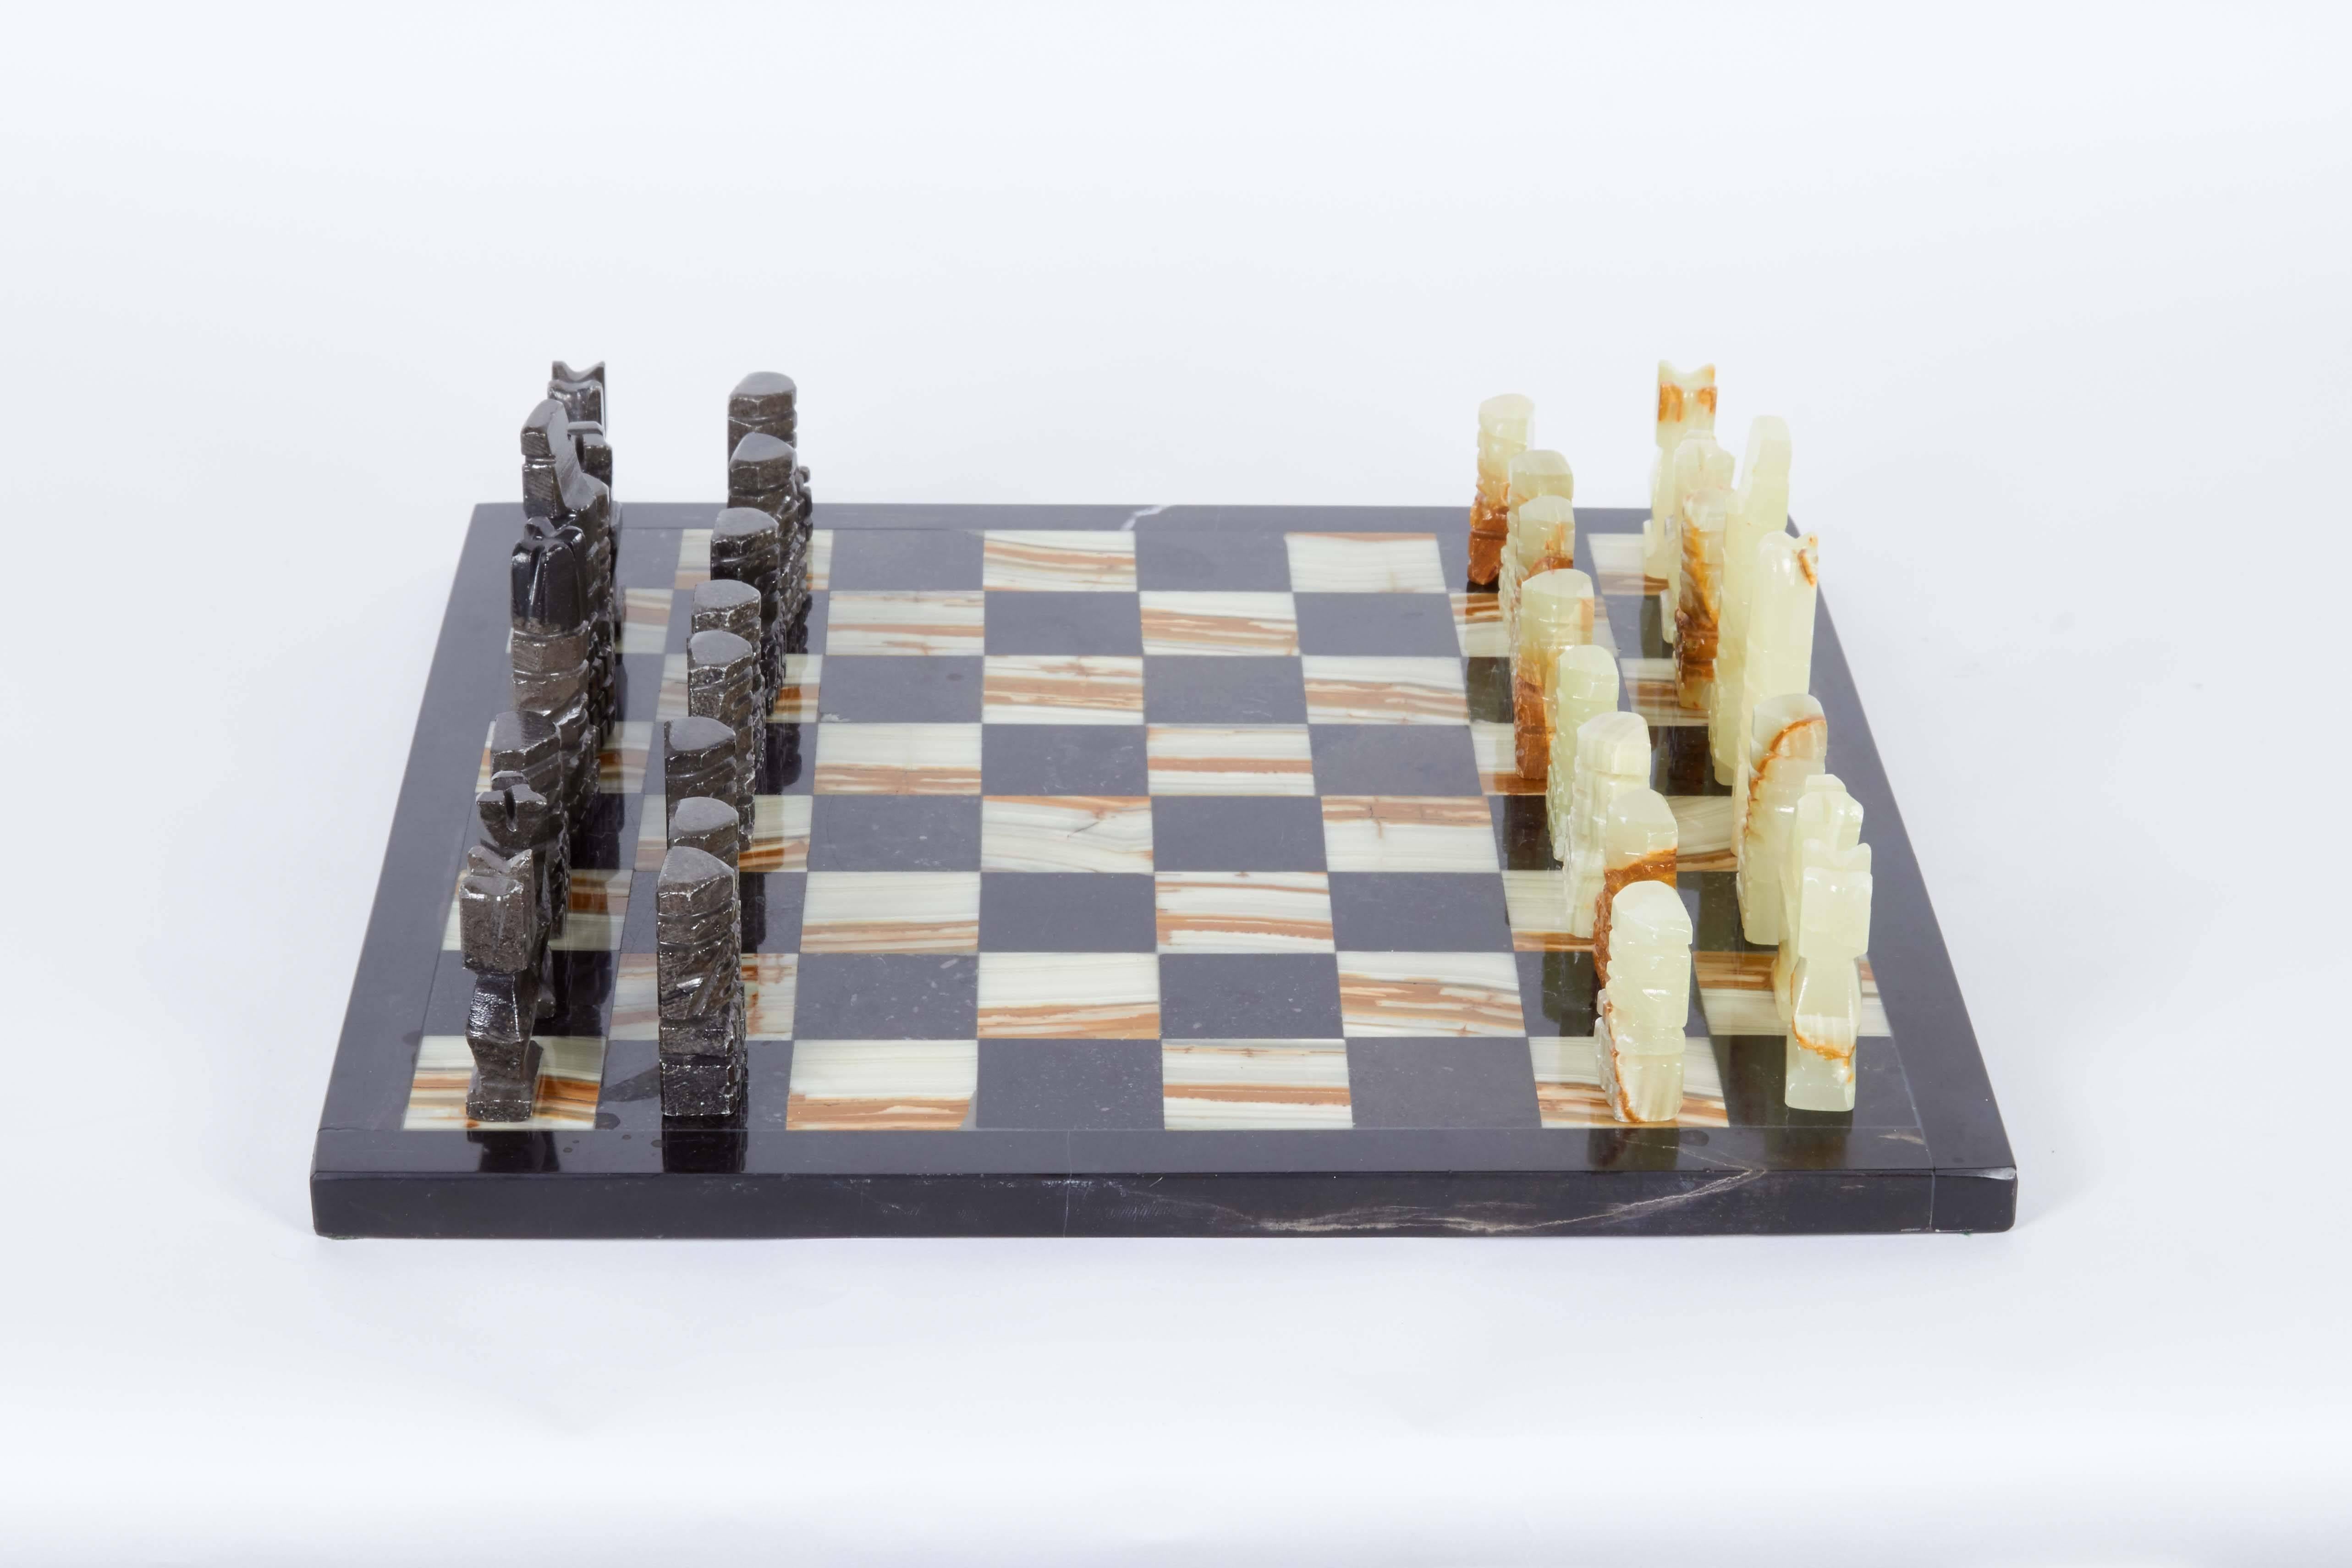 A chess board and 32 carved abstract pieces in onyx and black marble, produced in Mexico circa 1960s-1970s. Very good vintage condition, wear consistent with age and use.

Dimensions:
Board - .63